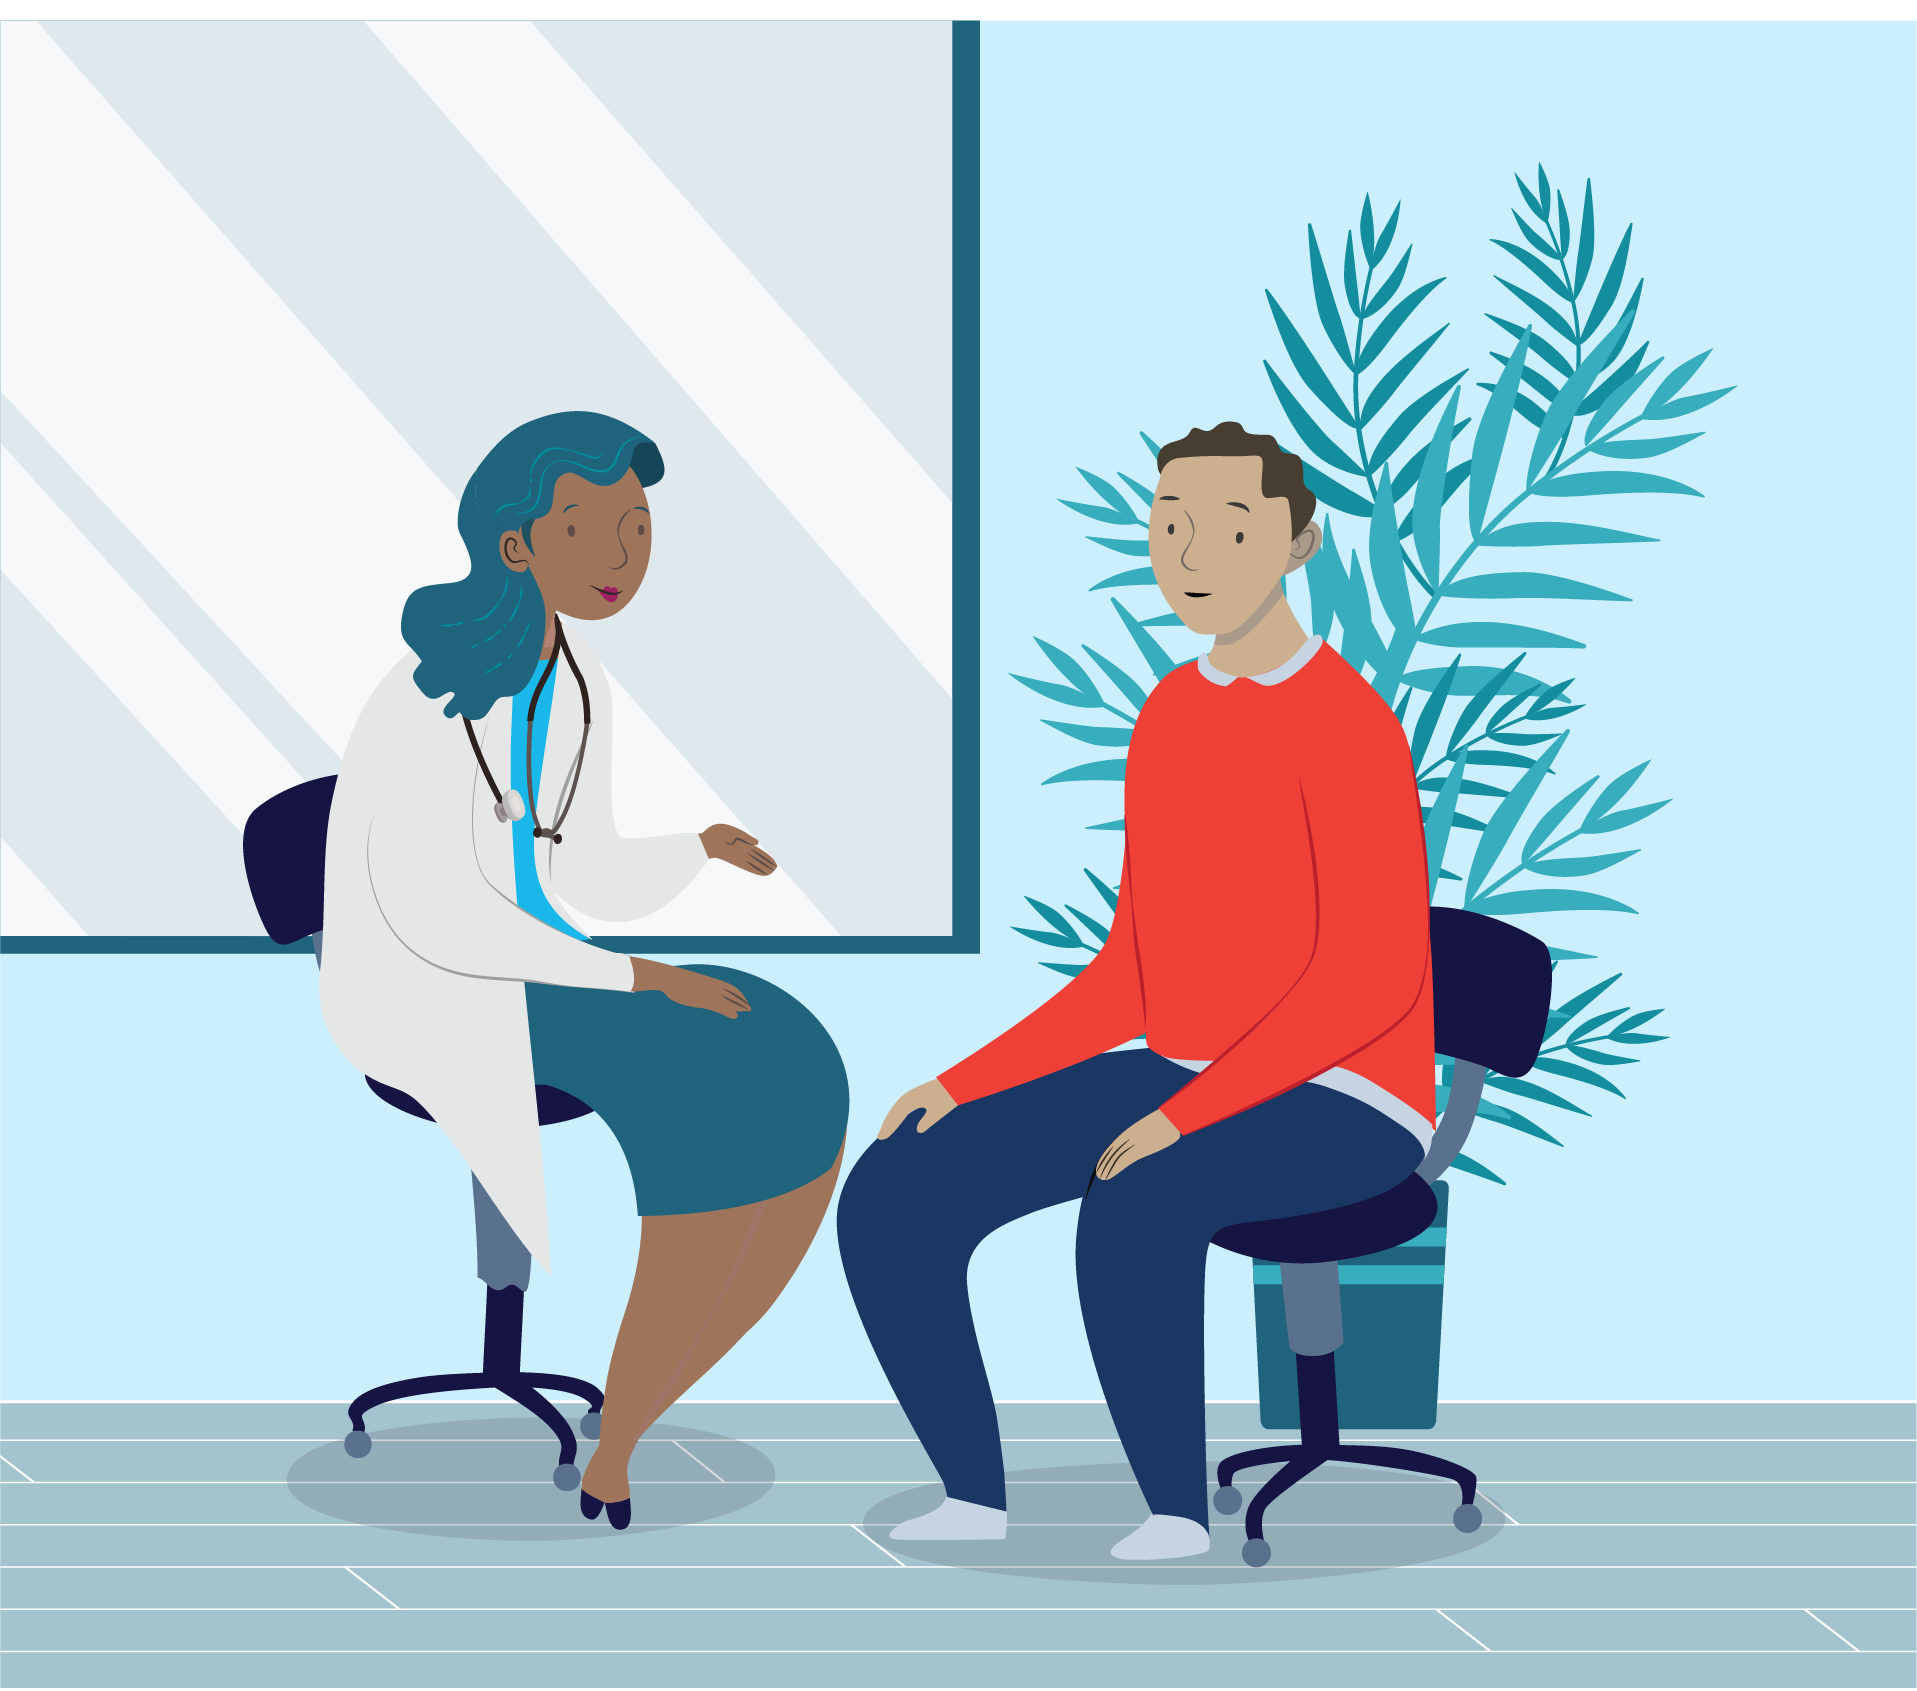 Illustration of a male patient talking to a health professional.